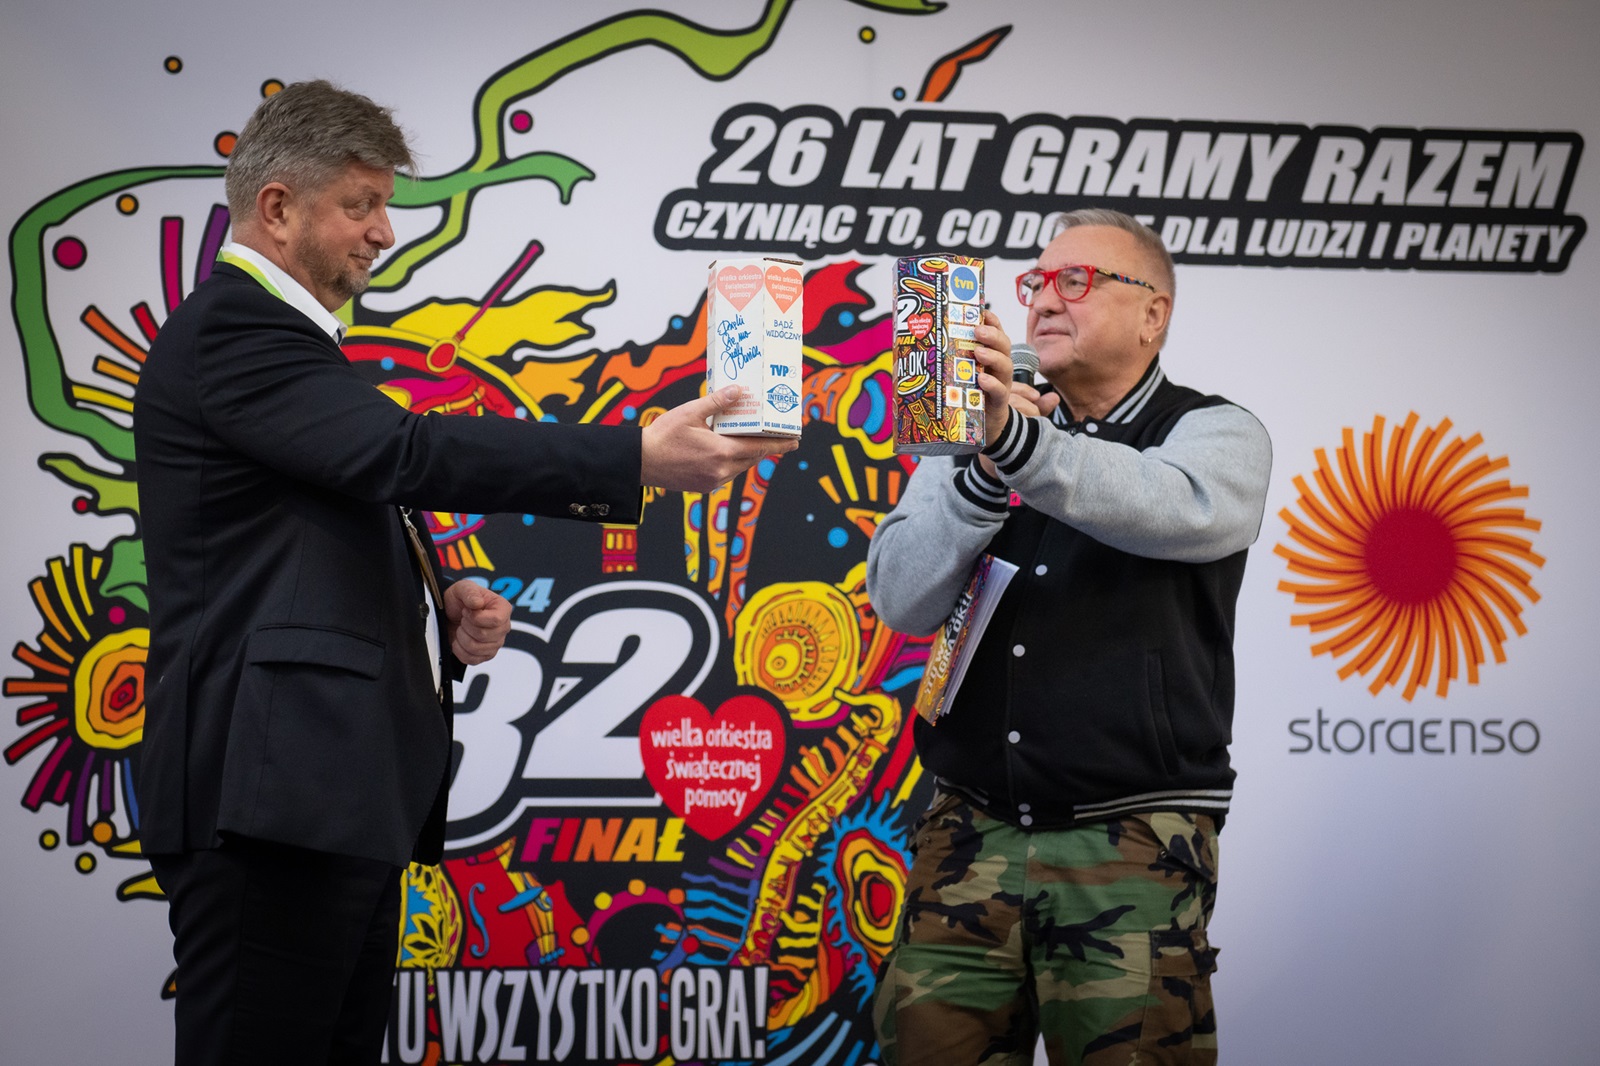 Tomasz Żebrowski (President of the board of Stora Enso Poland SA) and Jerzy Owsiak presenting the first, historical and the latest Collection Box ​before the 32nd Grand Finale, photo: Łukasz Widziszowski 